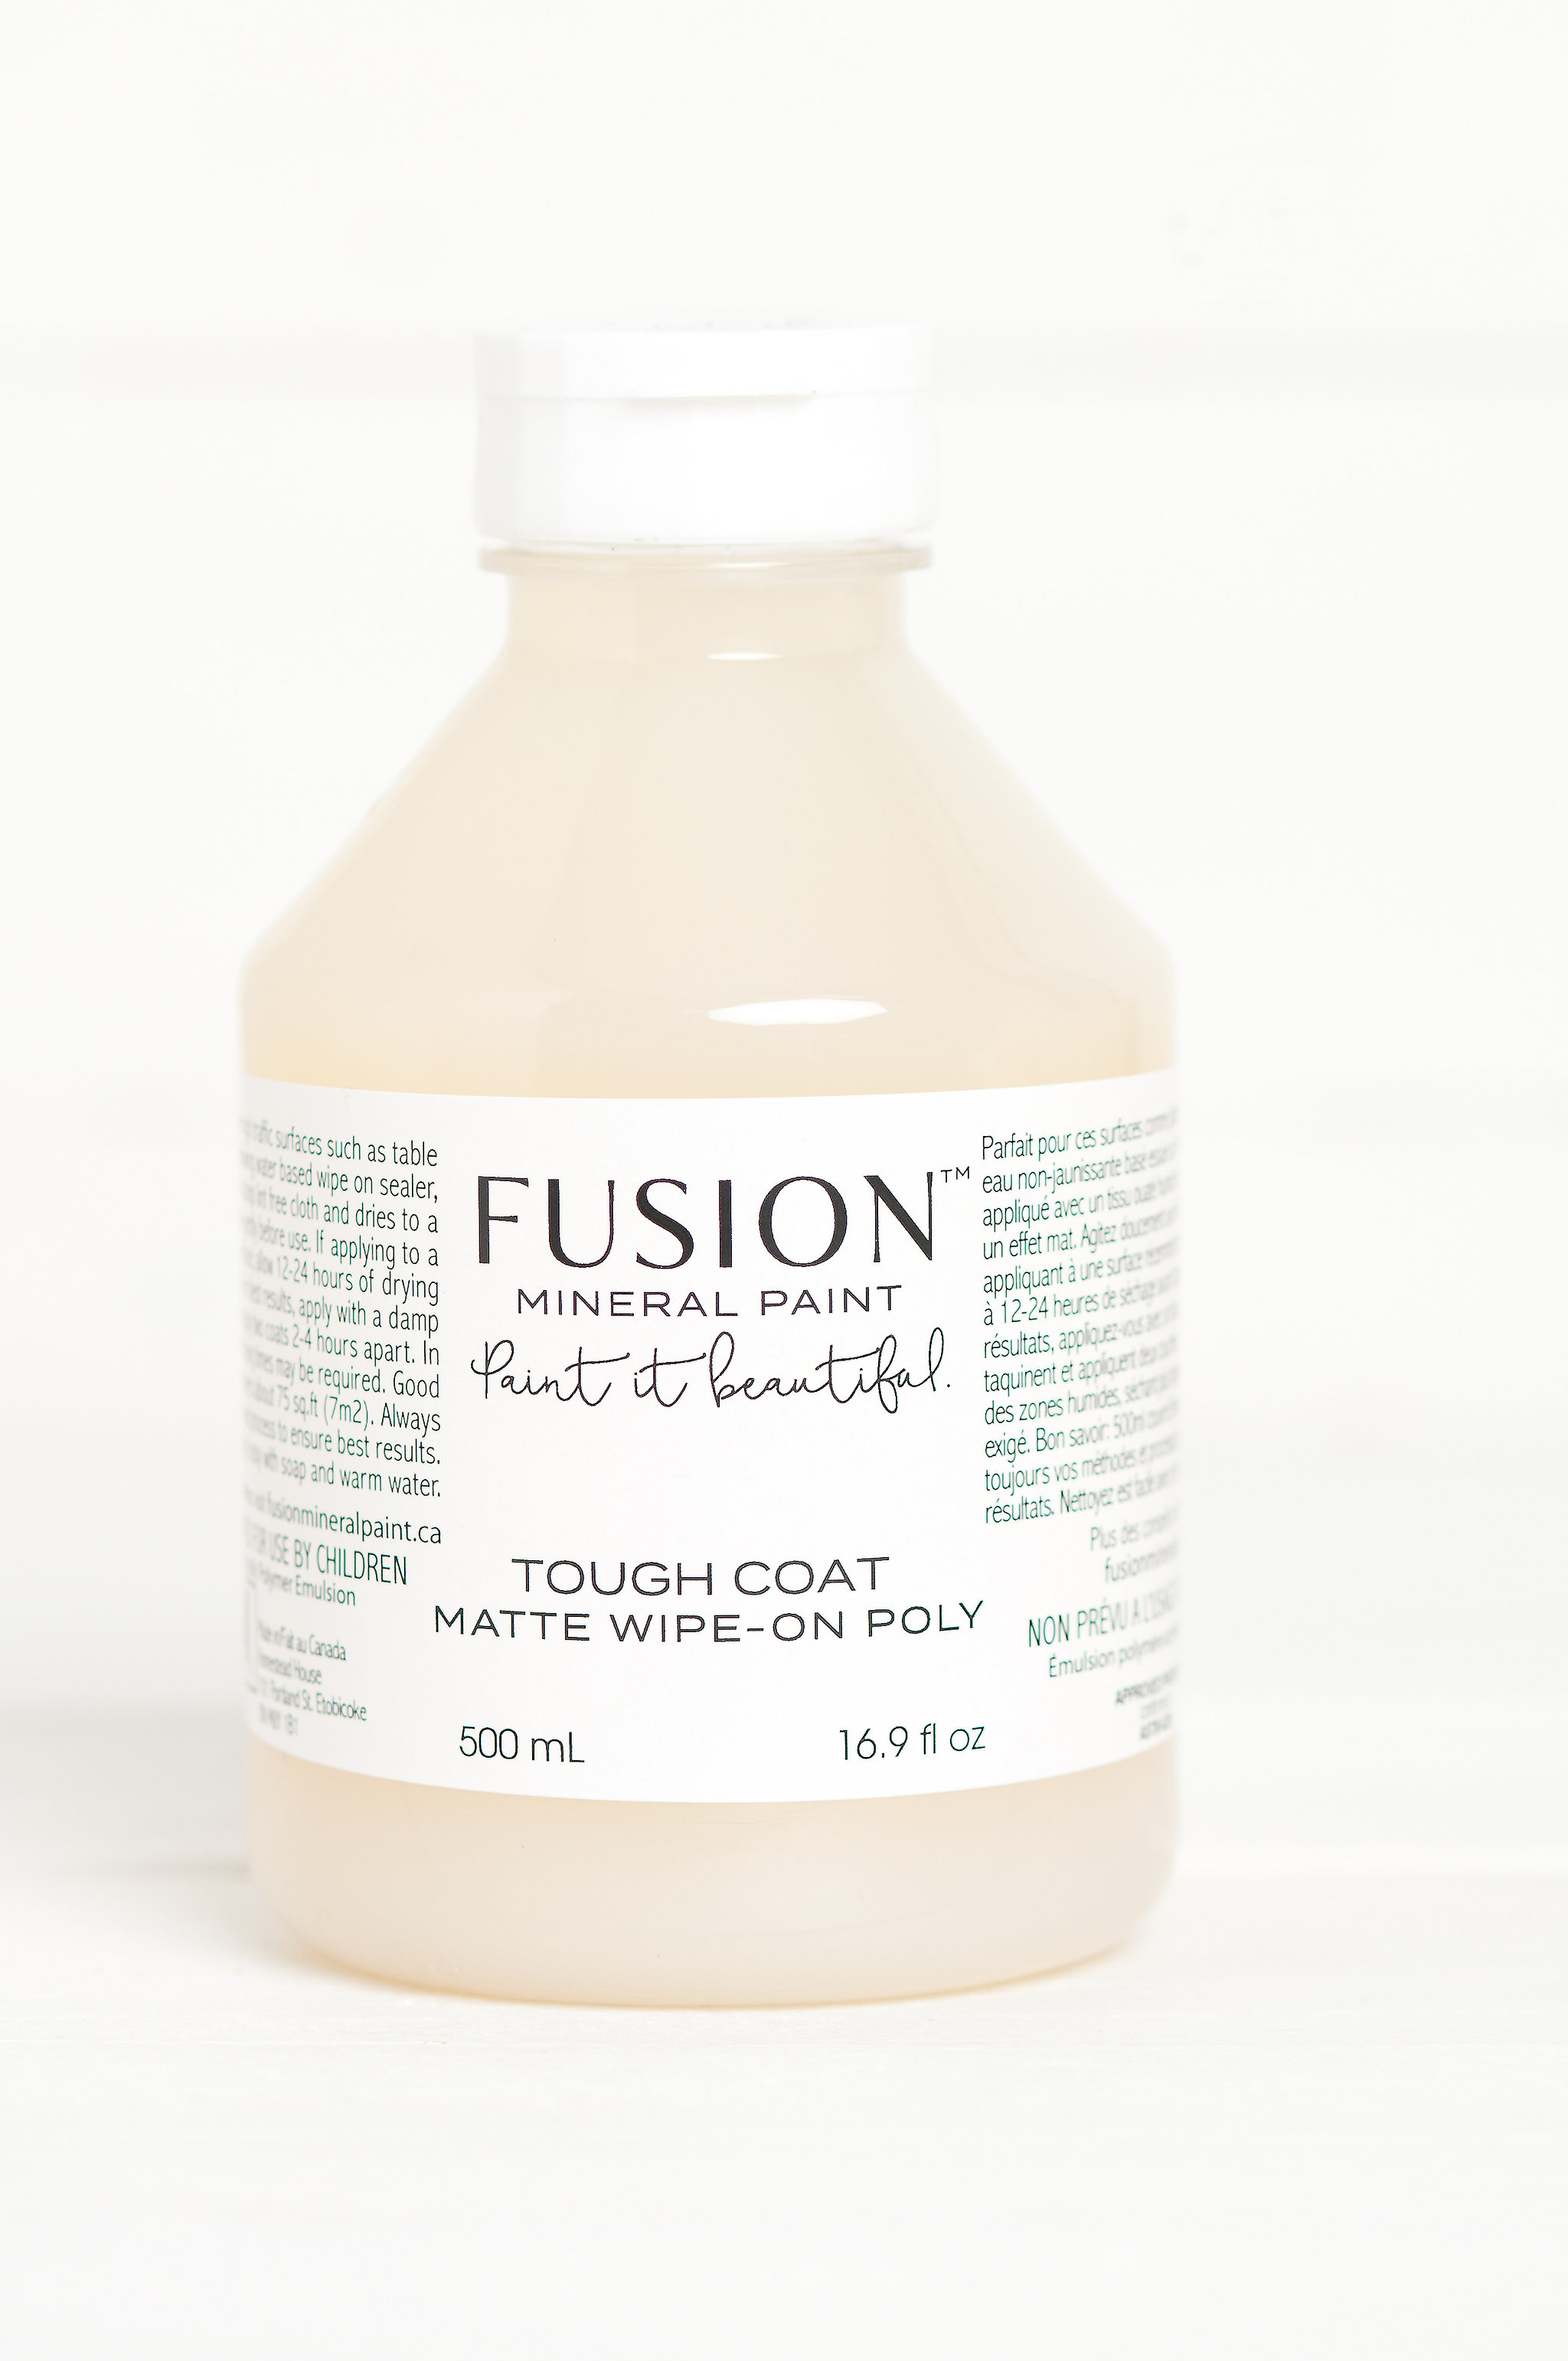 How to apply Tough Coat Fusion Mineral Paint